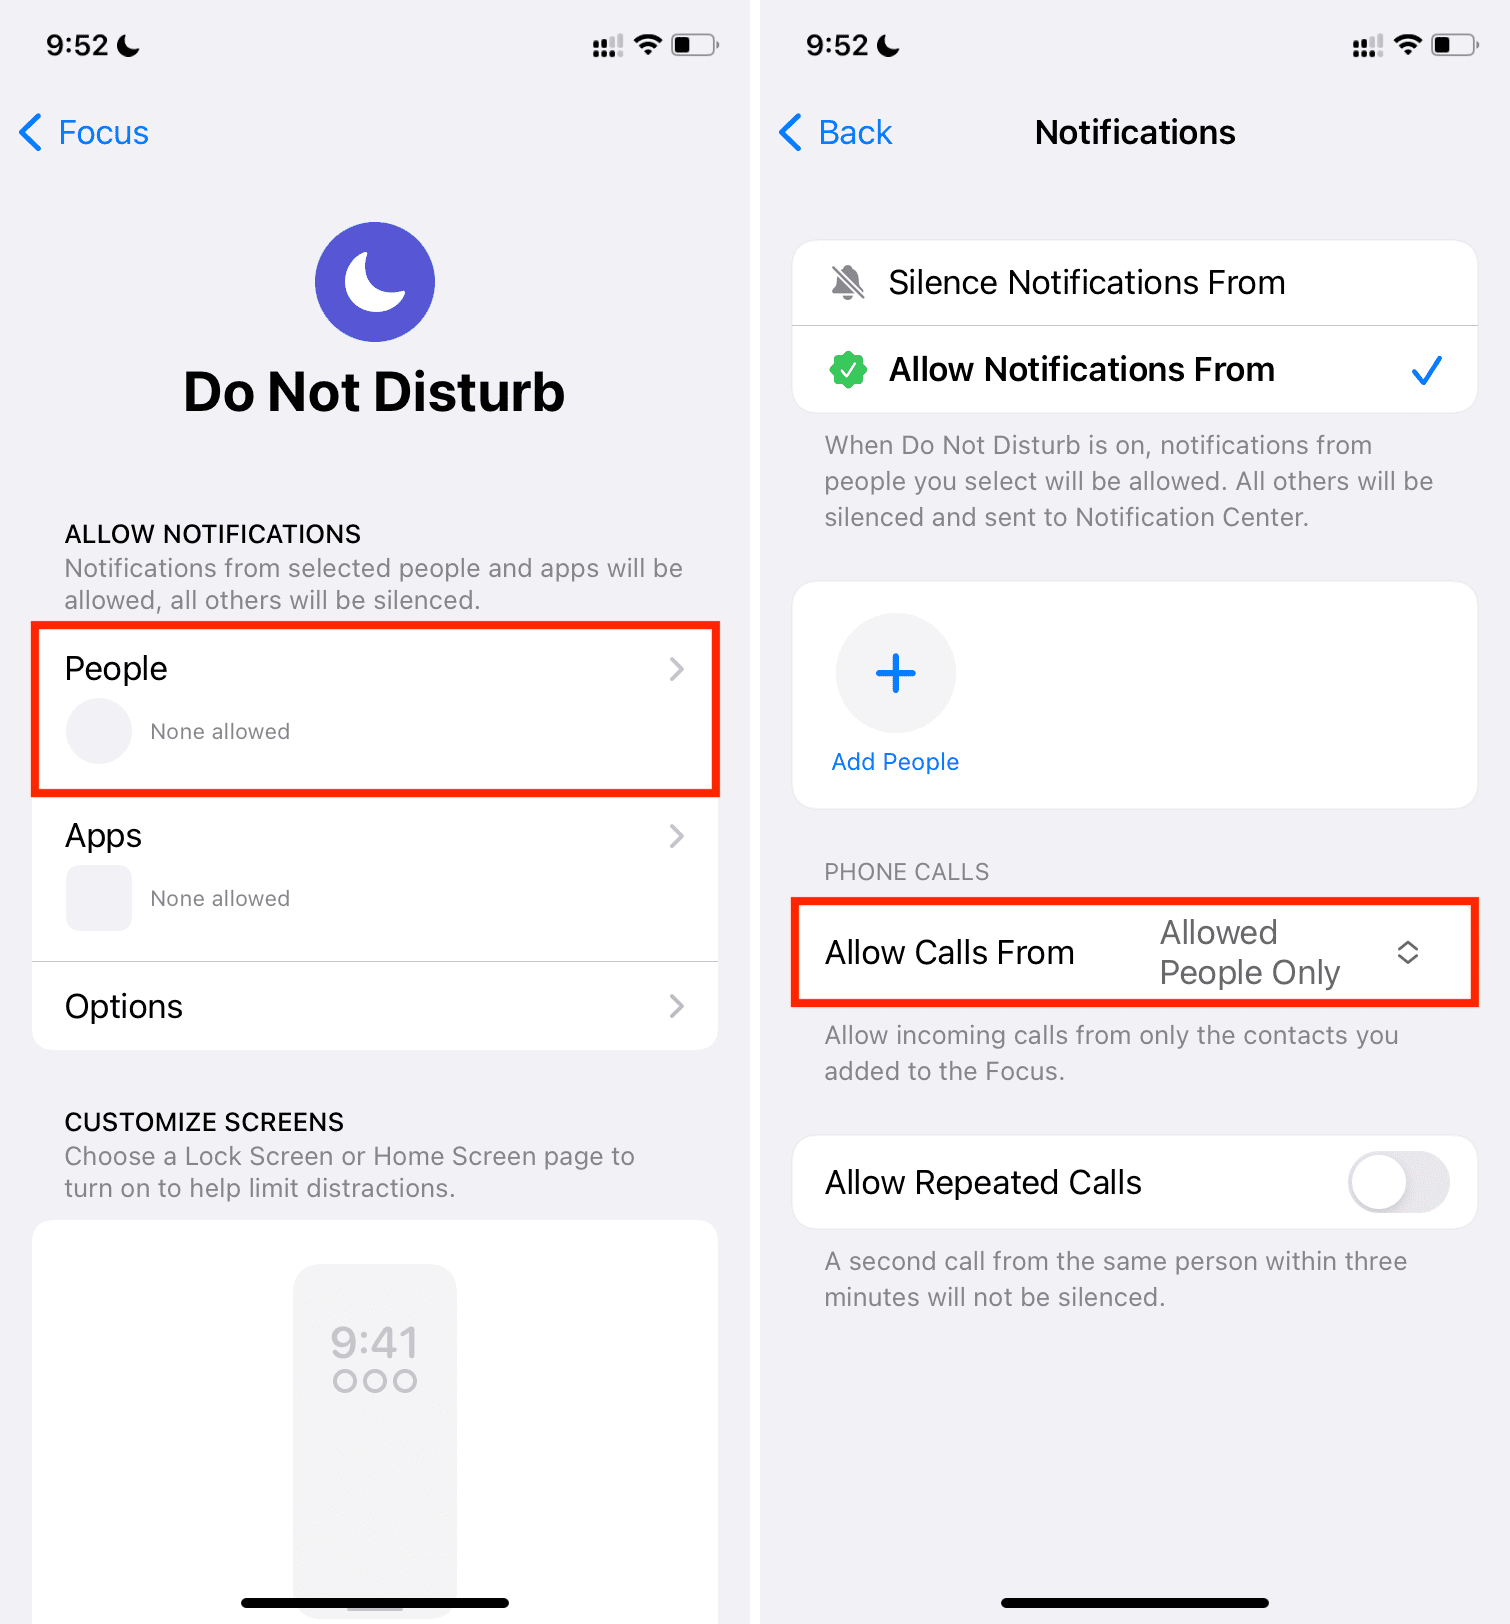 Allow Calls From Allowed People Only on iPhone during Do Not Disturb